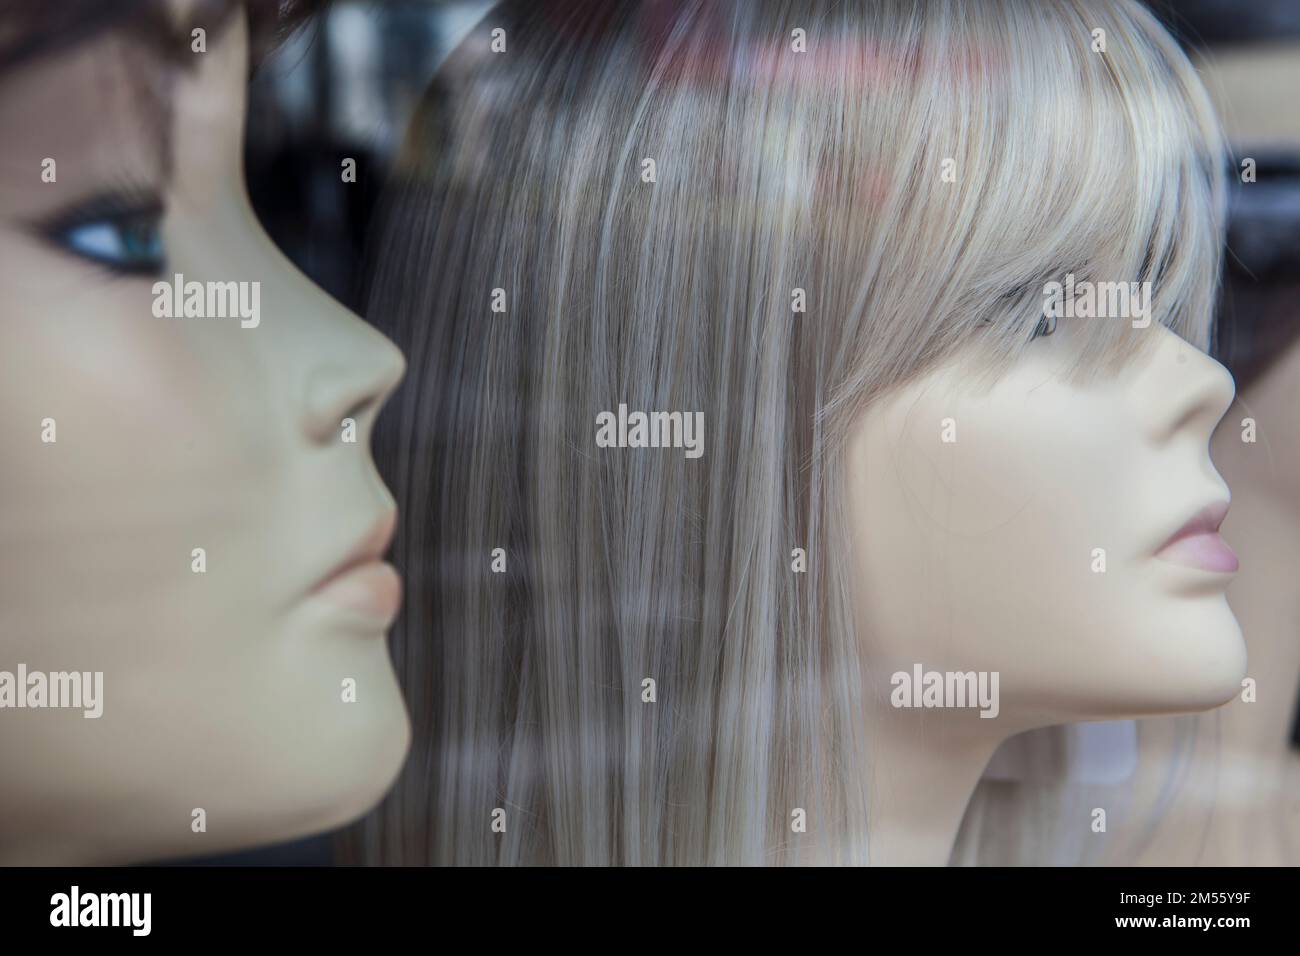 Wigs shop mannequins display. Wigs increases the wearers self-confidence and self-esteem Stock Photo